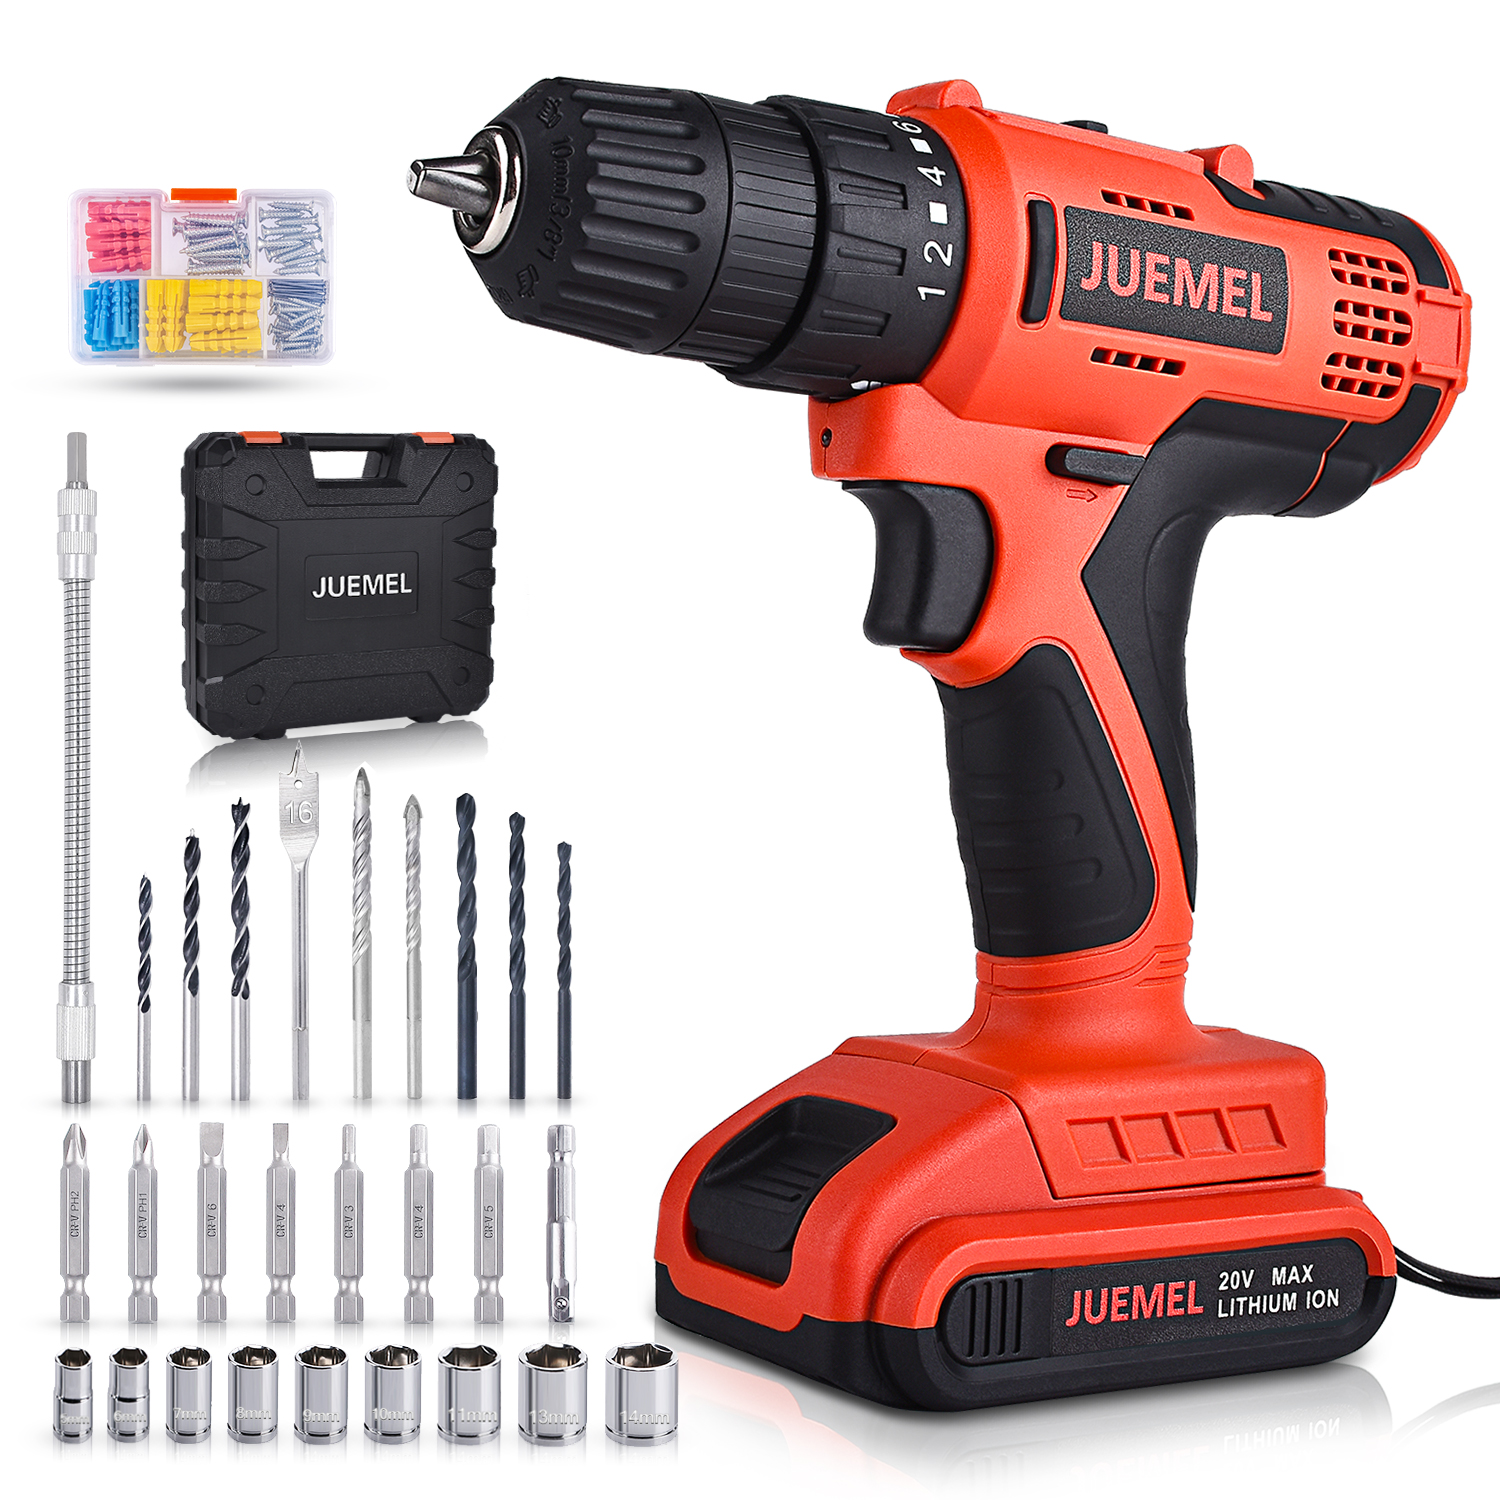 for DIY Project Electric Screwdriver Set 20V Cordless Drill Driver JUEMEL 100 PCS Accessories Power Drill 1 Battery 2000mAh / 1H Fast Charger/Max Torque 36Nm / 2 Variable Speed / 3/8 inch Chuck